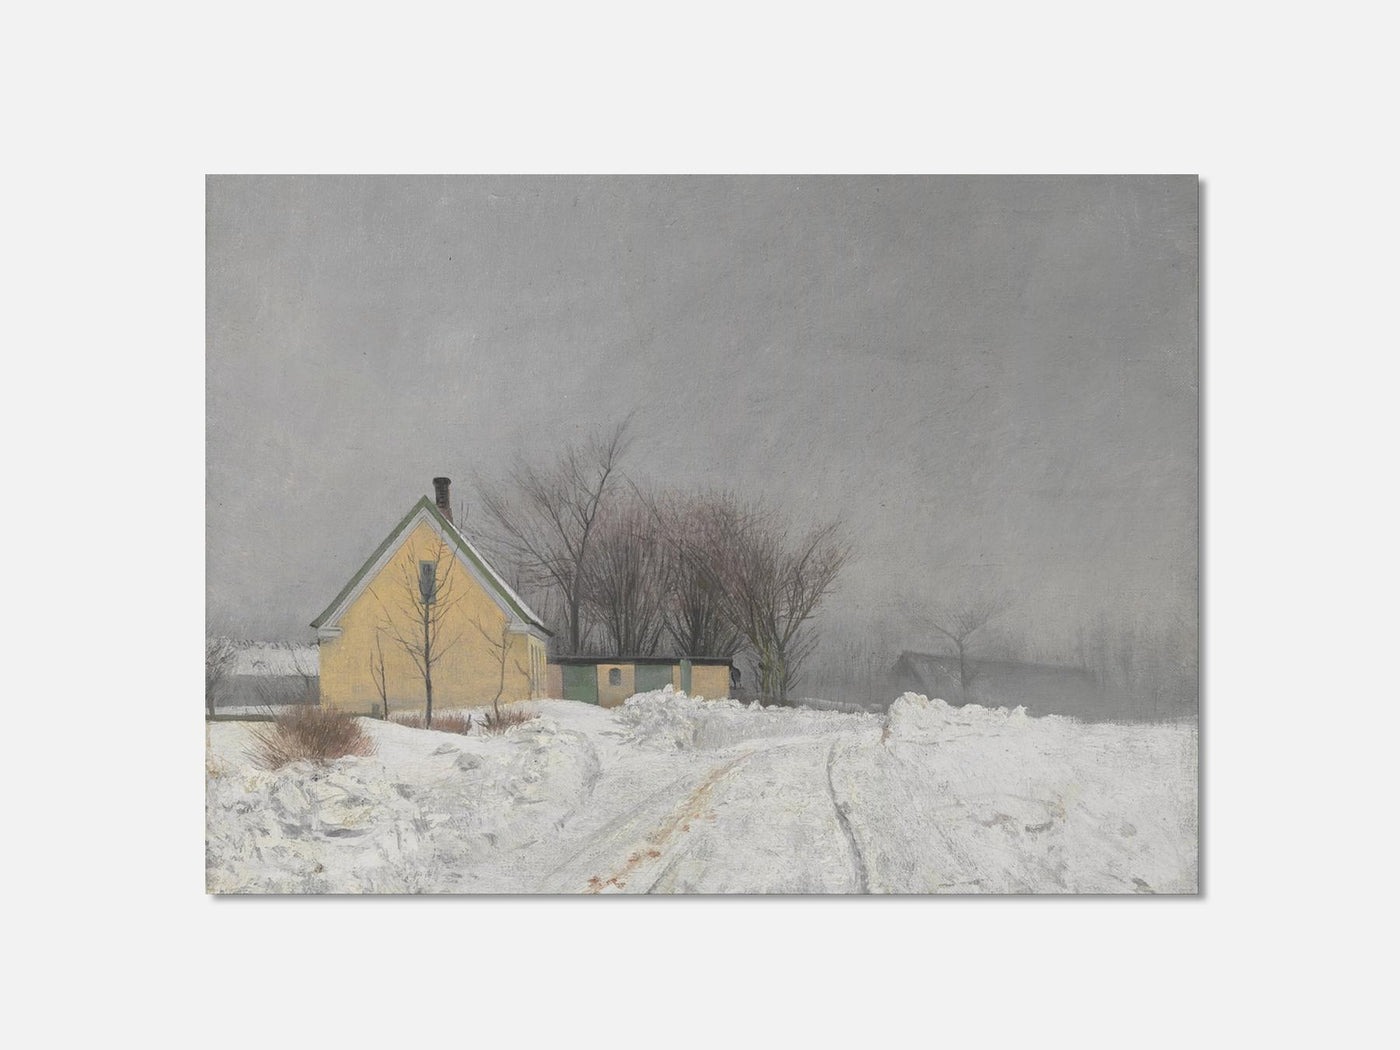 Foggy Winter Day. To the Left a Yellow House. Deep Snow 1 Unframed mockup variant